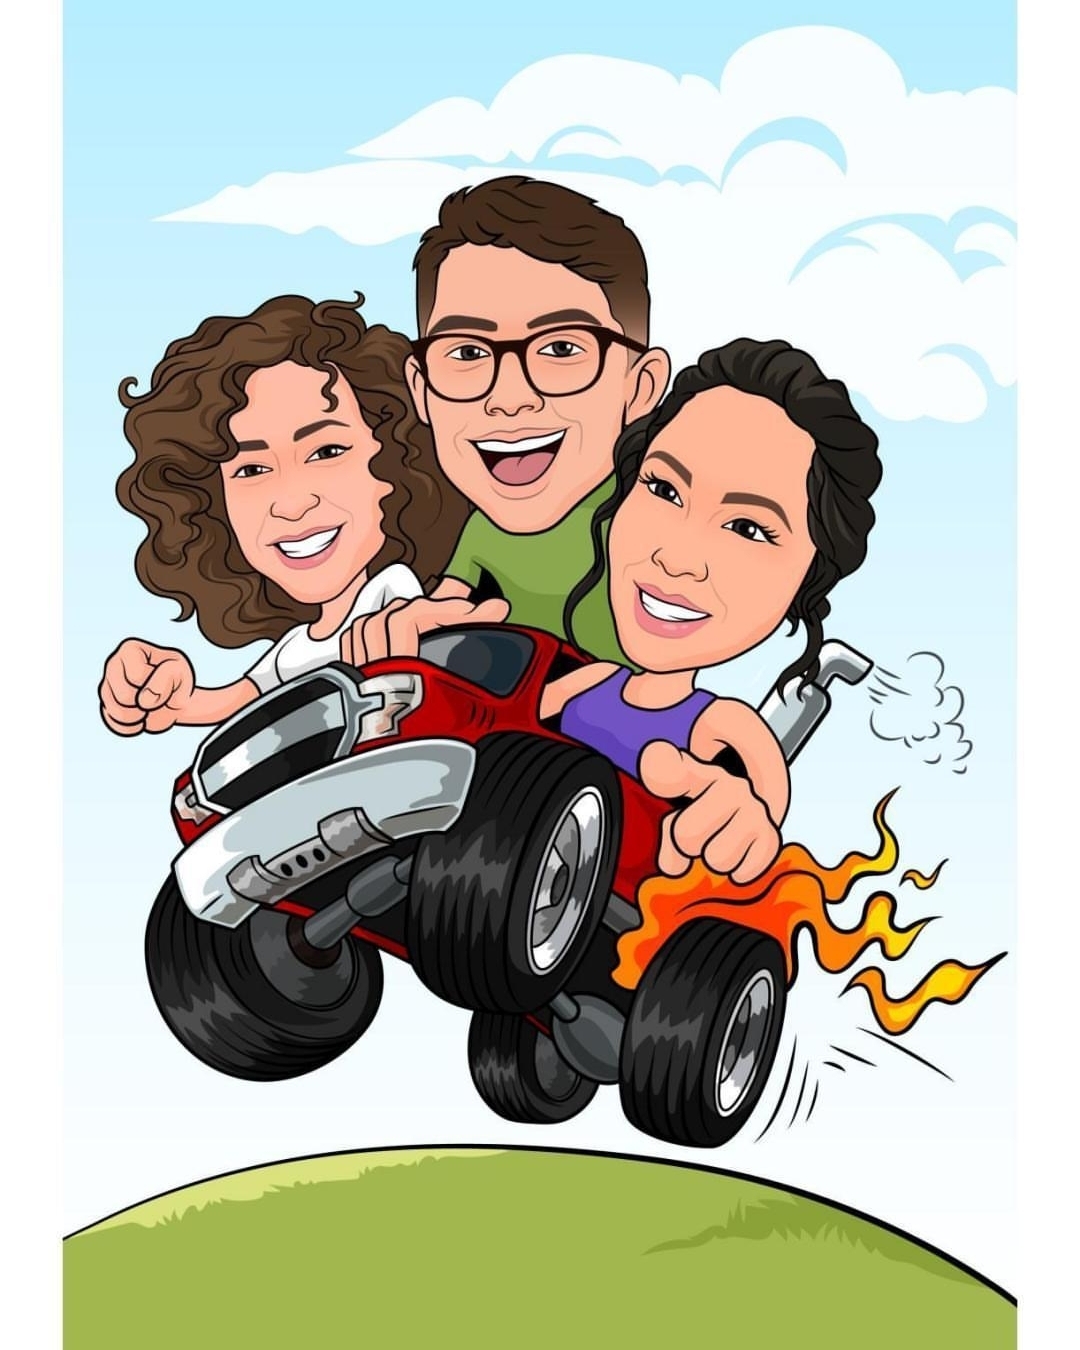 laughter is contagious - an iCartoonall creation from portfolio - three people laughing in a car